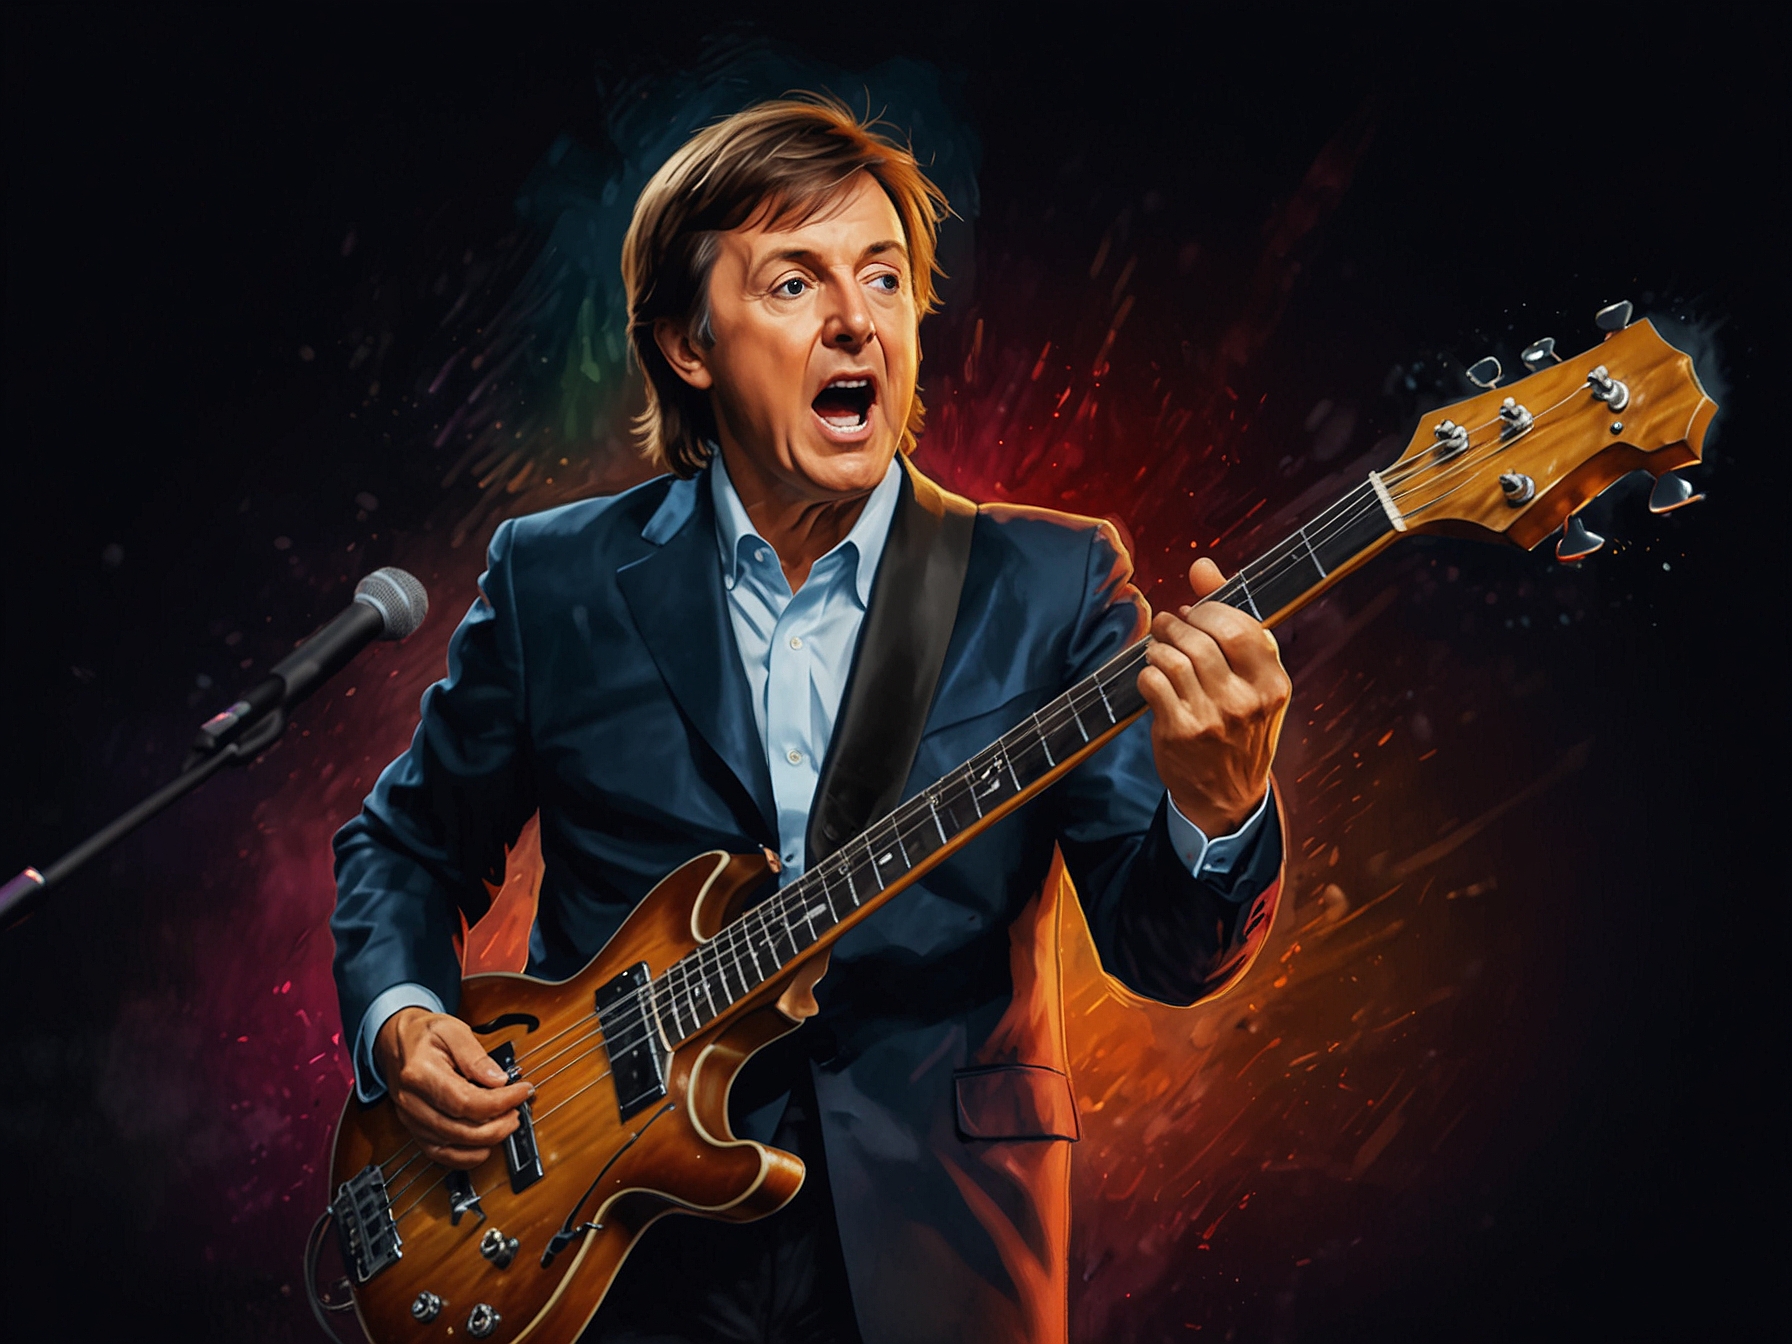 An image of Sir Paul McCartney on stage, passionately playing his iconic Höfner bass guitar, with a vibrant light show illuminating the background, capturing the energy of his live performances.